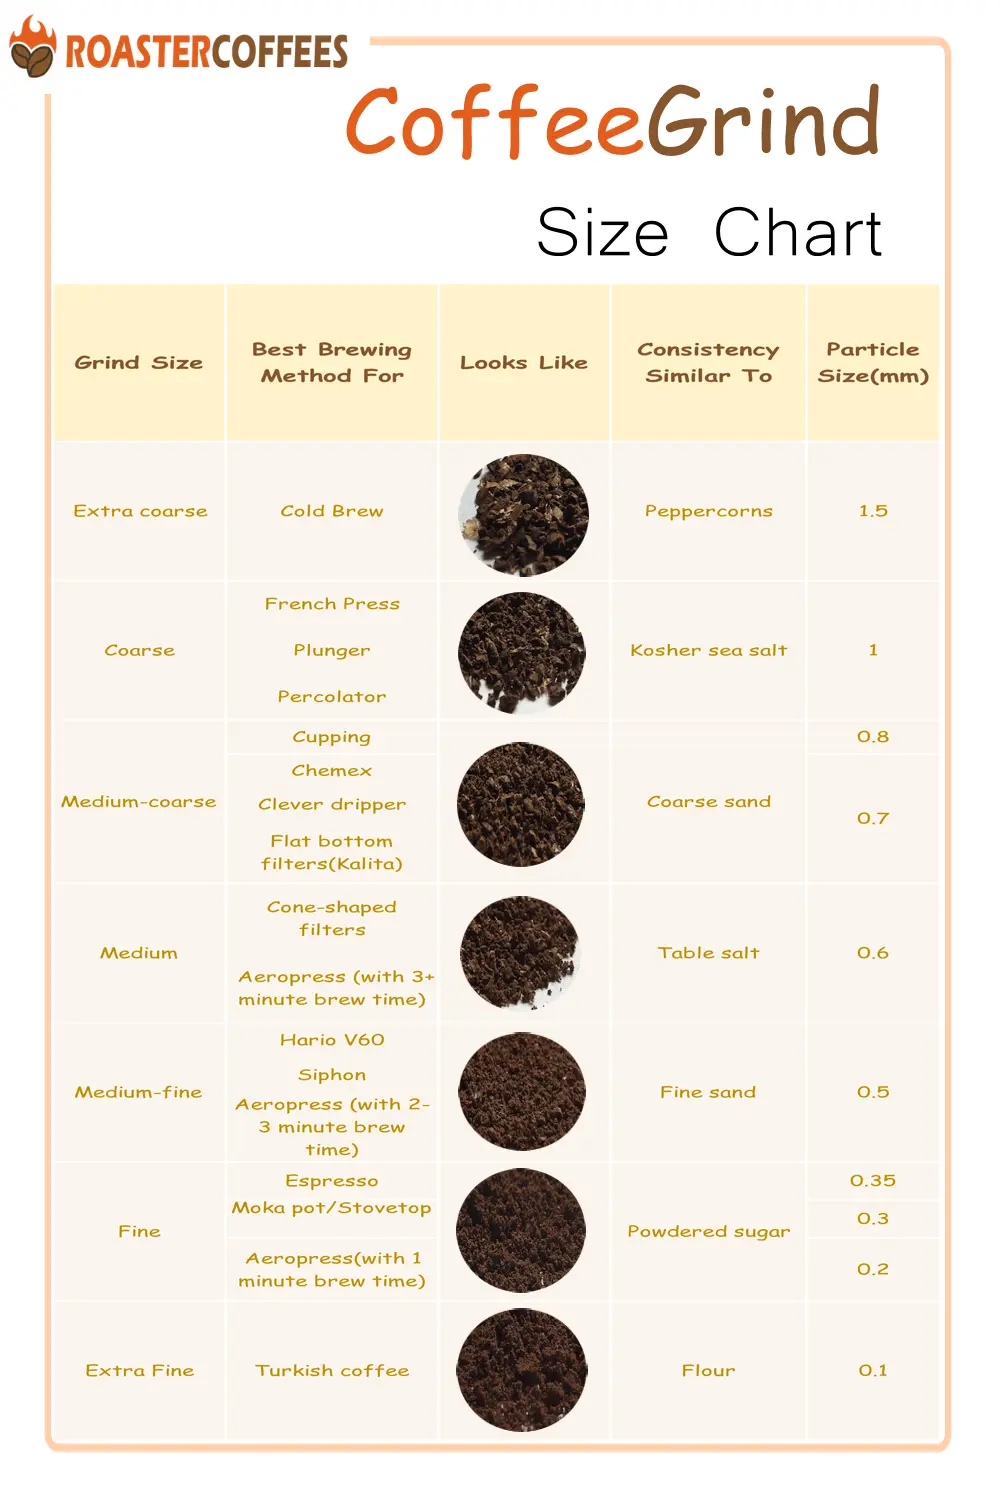 Coffee grind size chart, including sizes from coarse to fine, suitable brewing methods